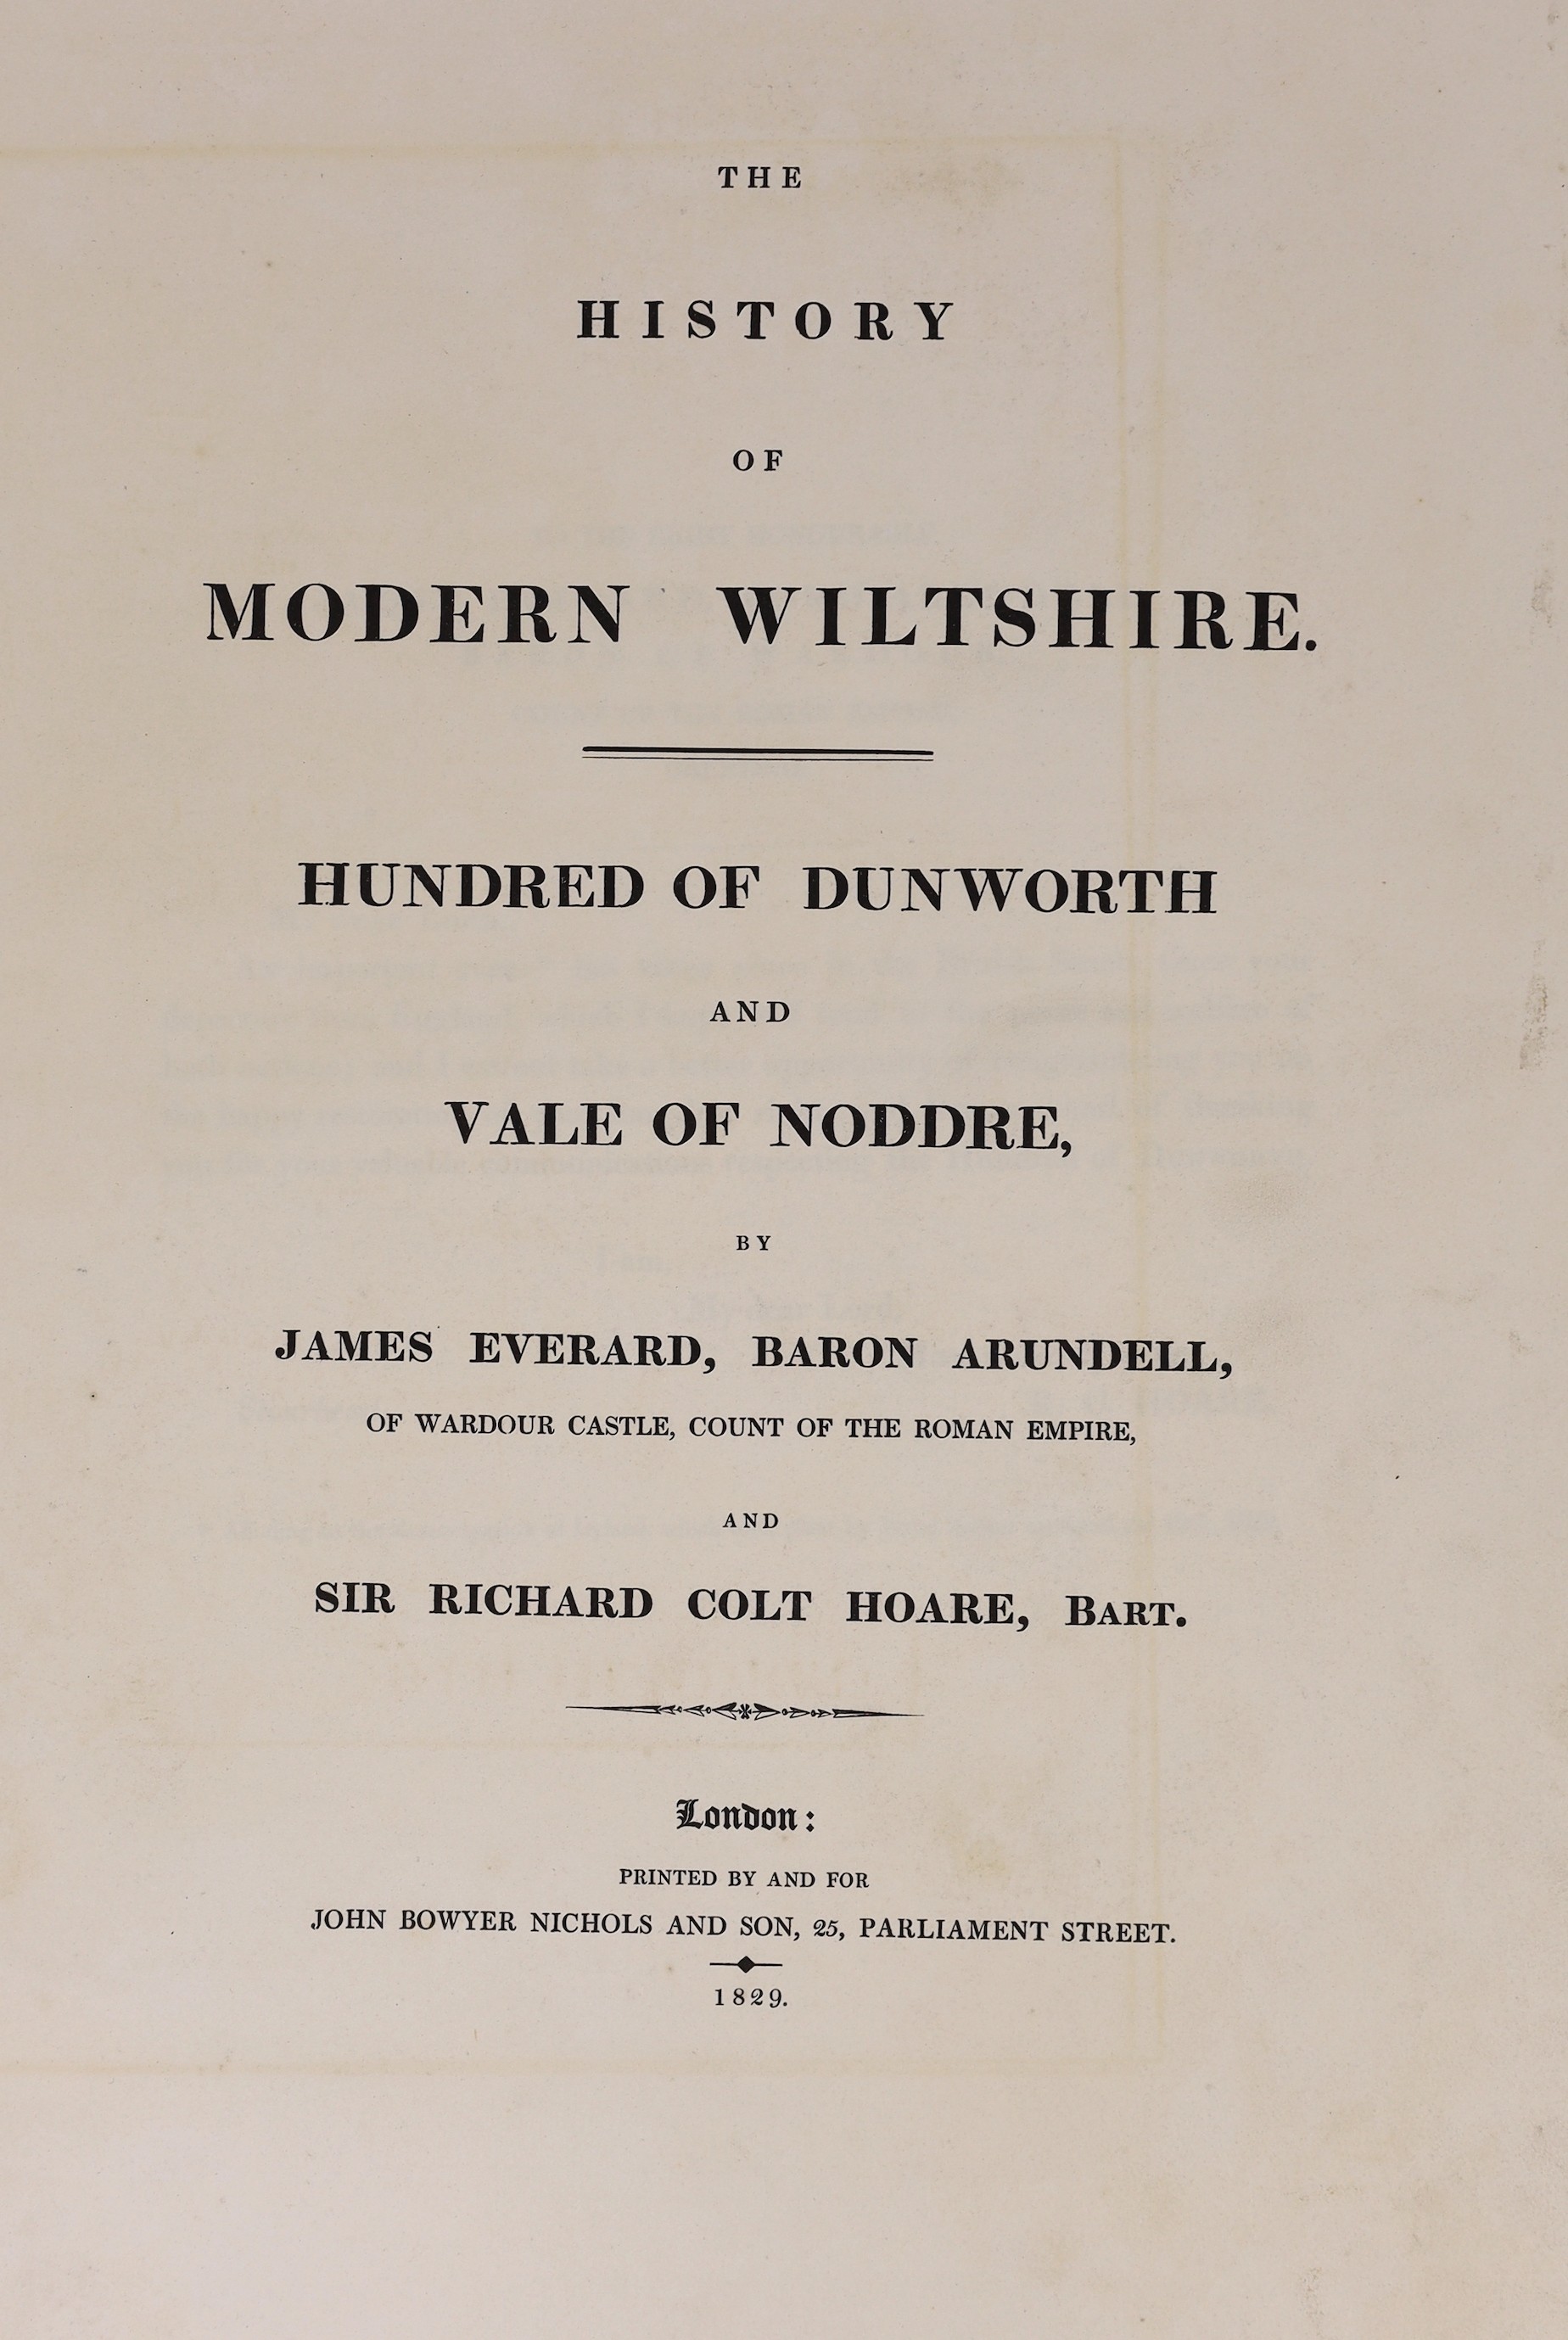 WILTS: Everard, James (Lord Arundell) and Hoare, Sir Richard Colt - The History of Modern Wiltshire. Hundred of Dunworth and Vale of Noddre. d-page map, 15 portraits and plates